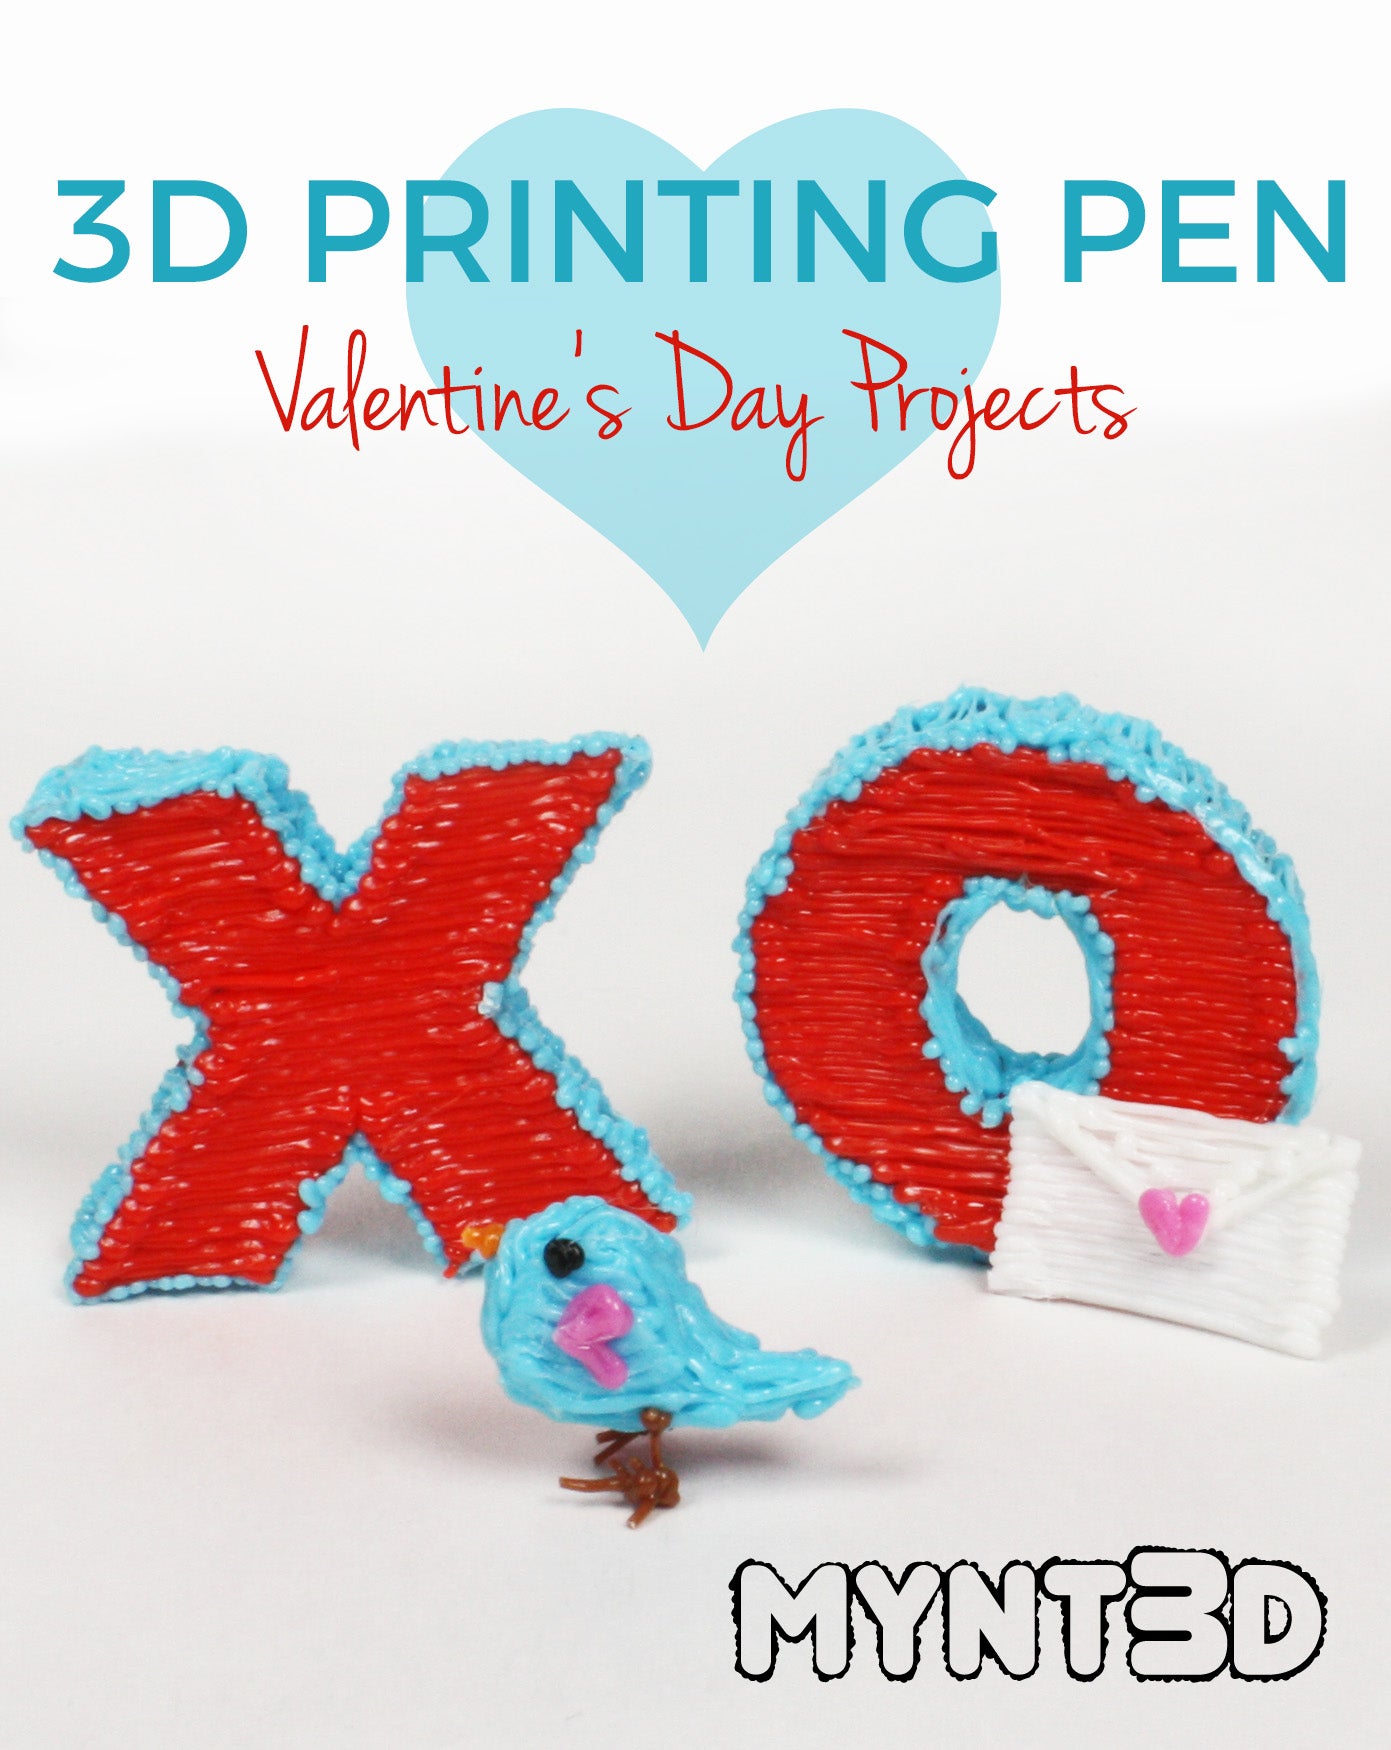 4 Valentine's Day Projects to Make with a 3D Pen